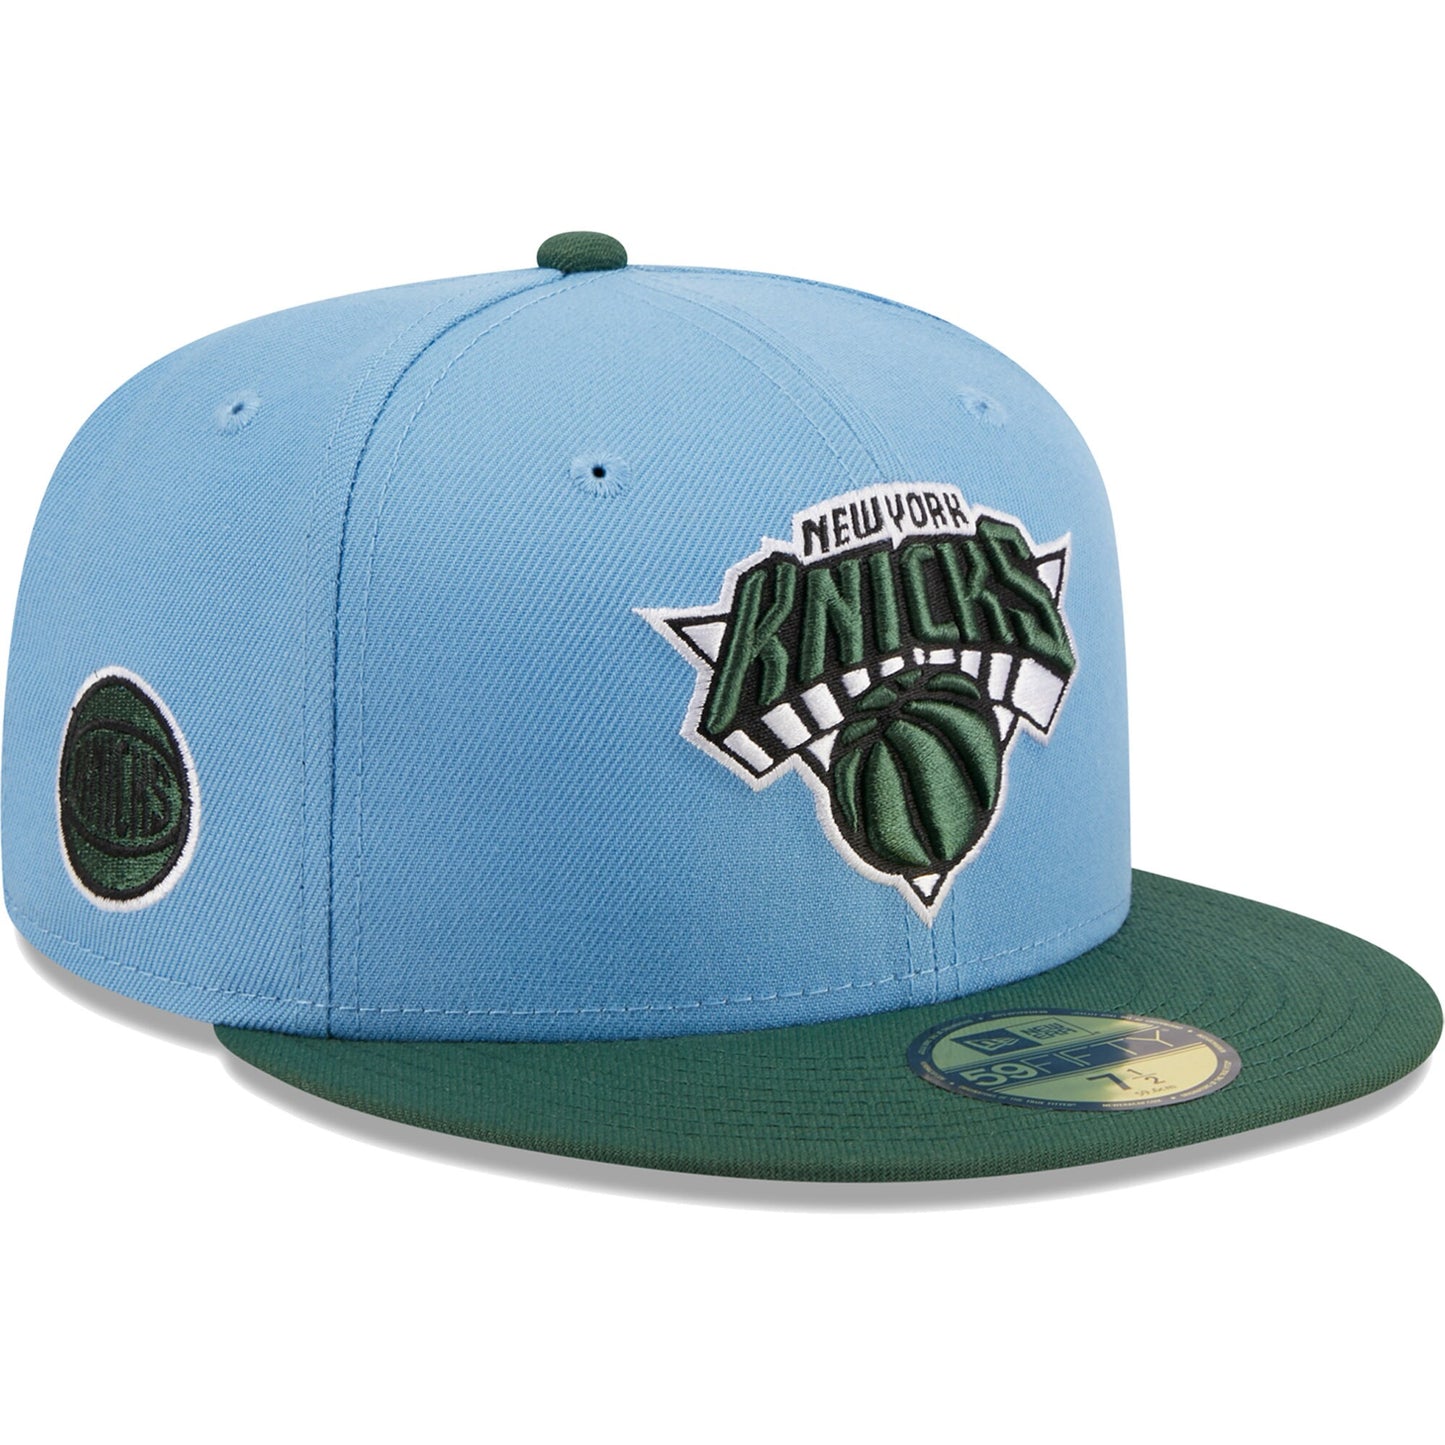 New York Knicks New Era Two-Tone 59FIFTY Fitted Hat - Light Blue/Green